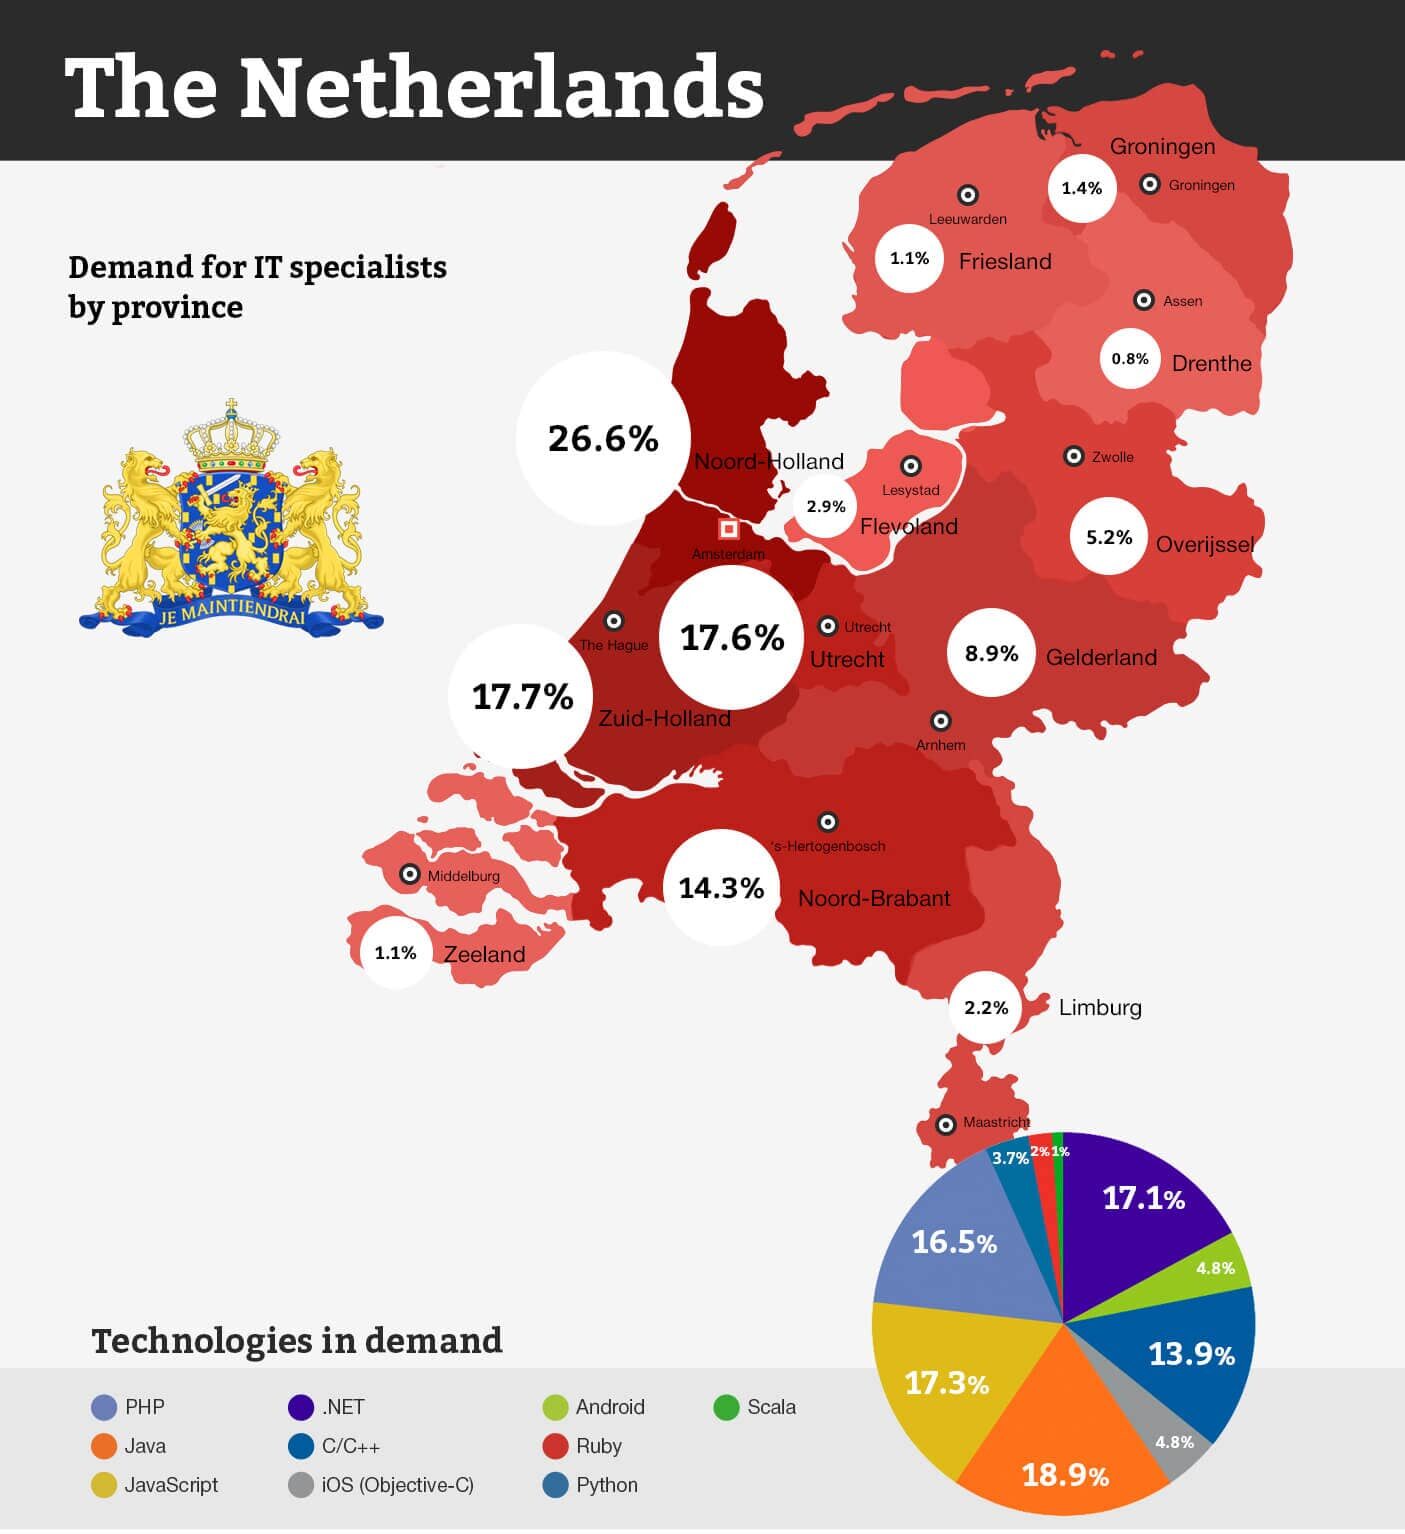 Infographic: software development technologies and software developers in demand in the Netherlands | Redwerk company research